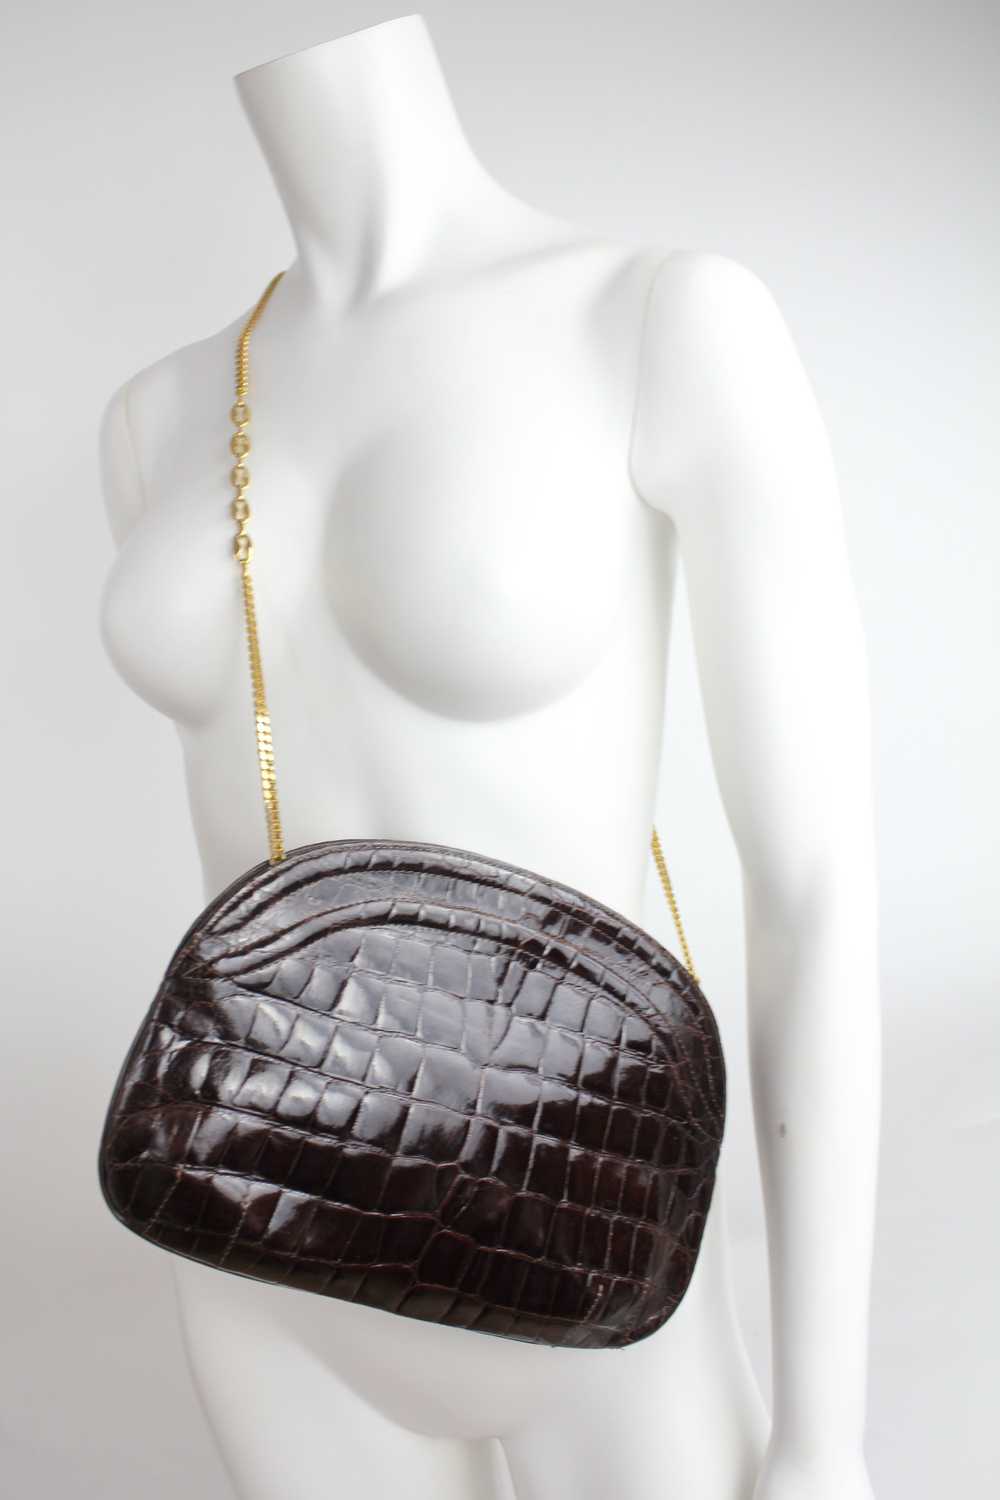 Vintage 1970s Crocodile Purse with Gold Chain Lin… - image 2